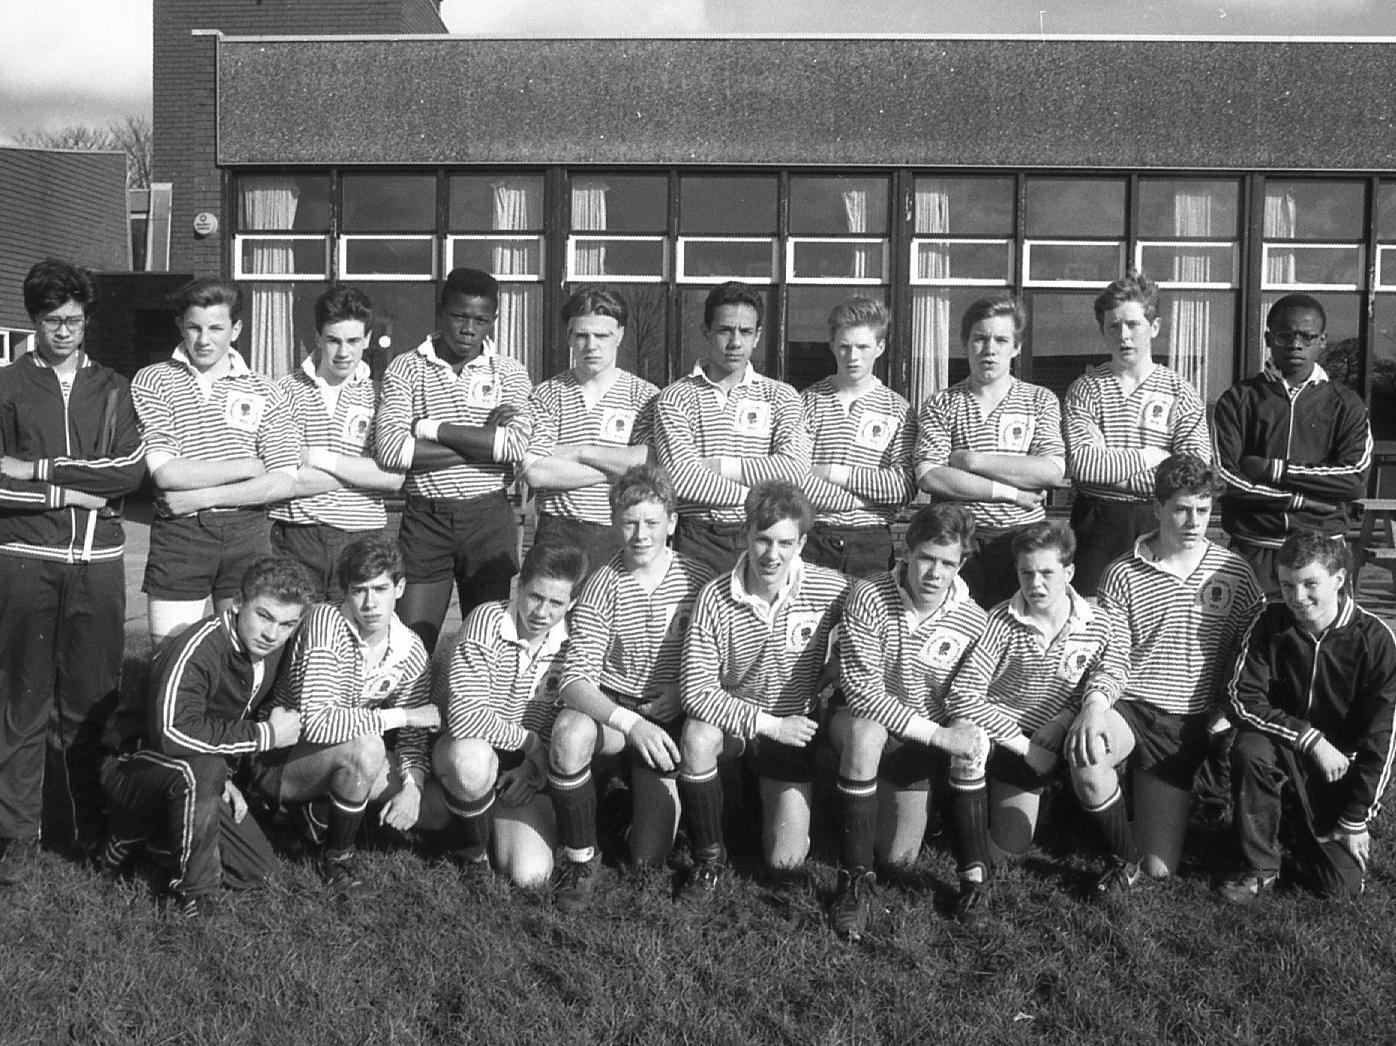 All dressed up and ready for action - the victorious Rossall school rugby team line-up before the crucial clash with Newcastle RGS at Preston Grasshoppers. They won 7-0